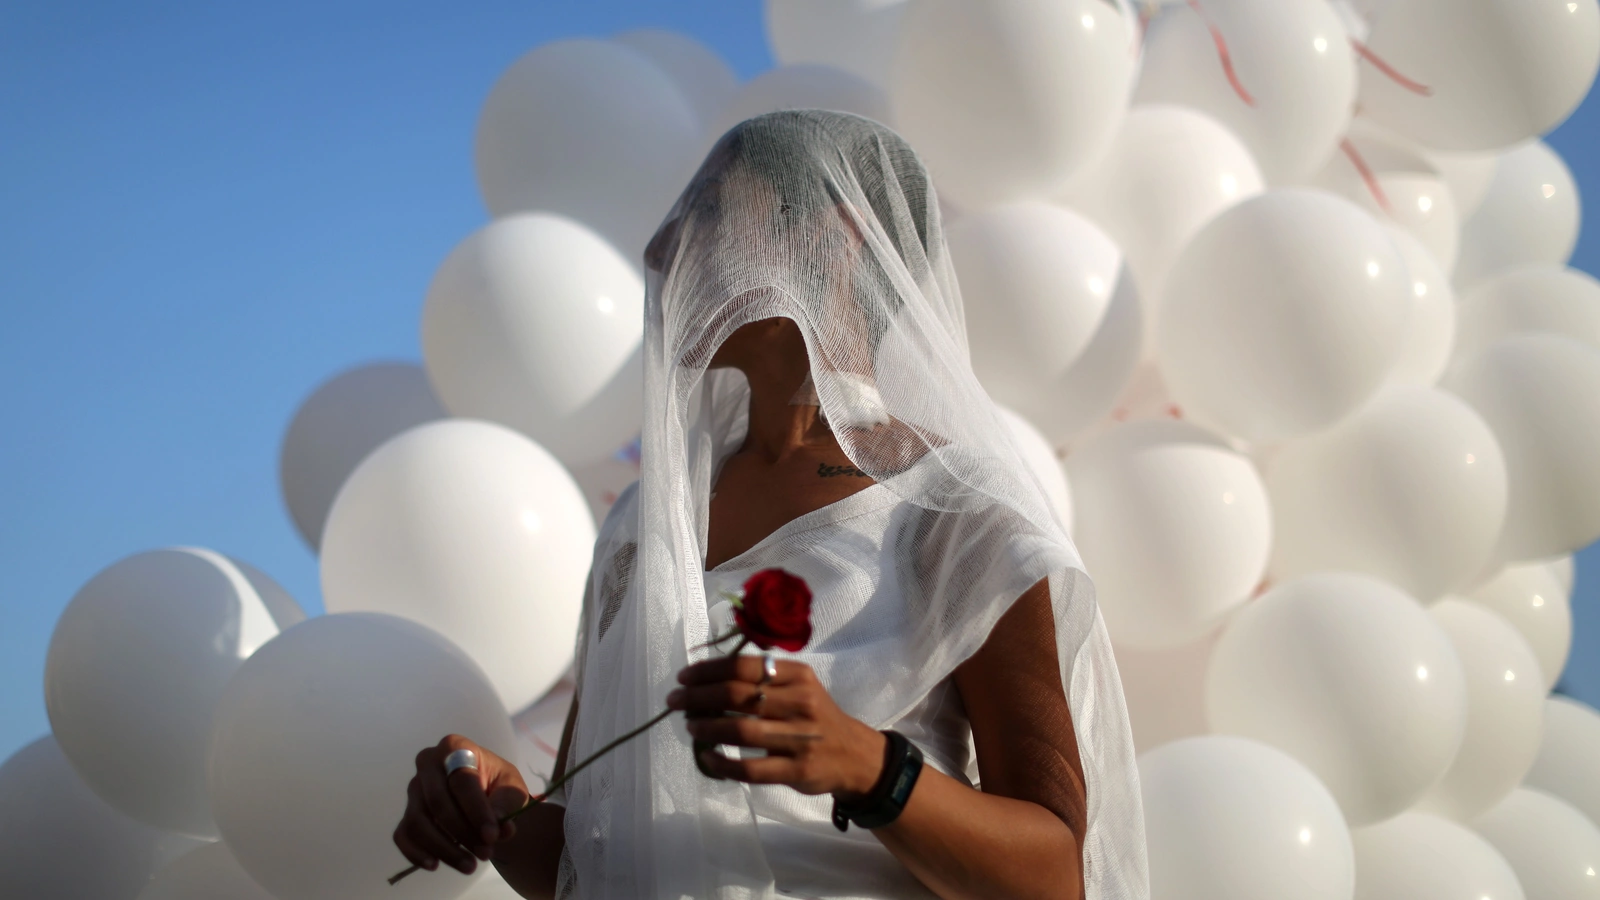 A Lebanese activist celebrates the repeal of a law that allowed rapists to marry their victims to avoid prosecution.